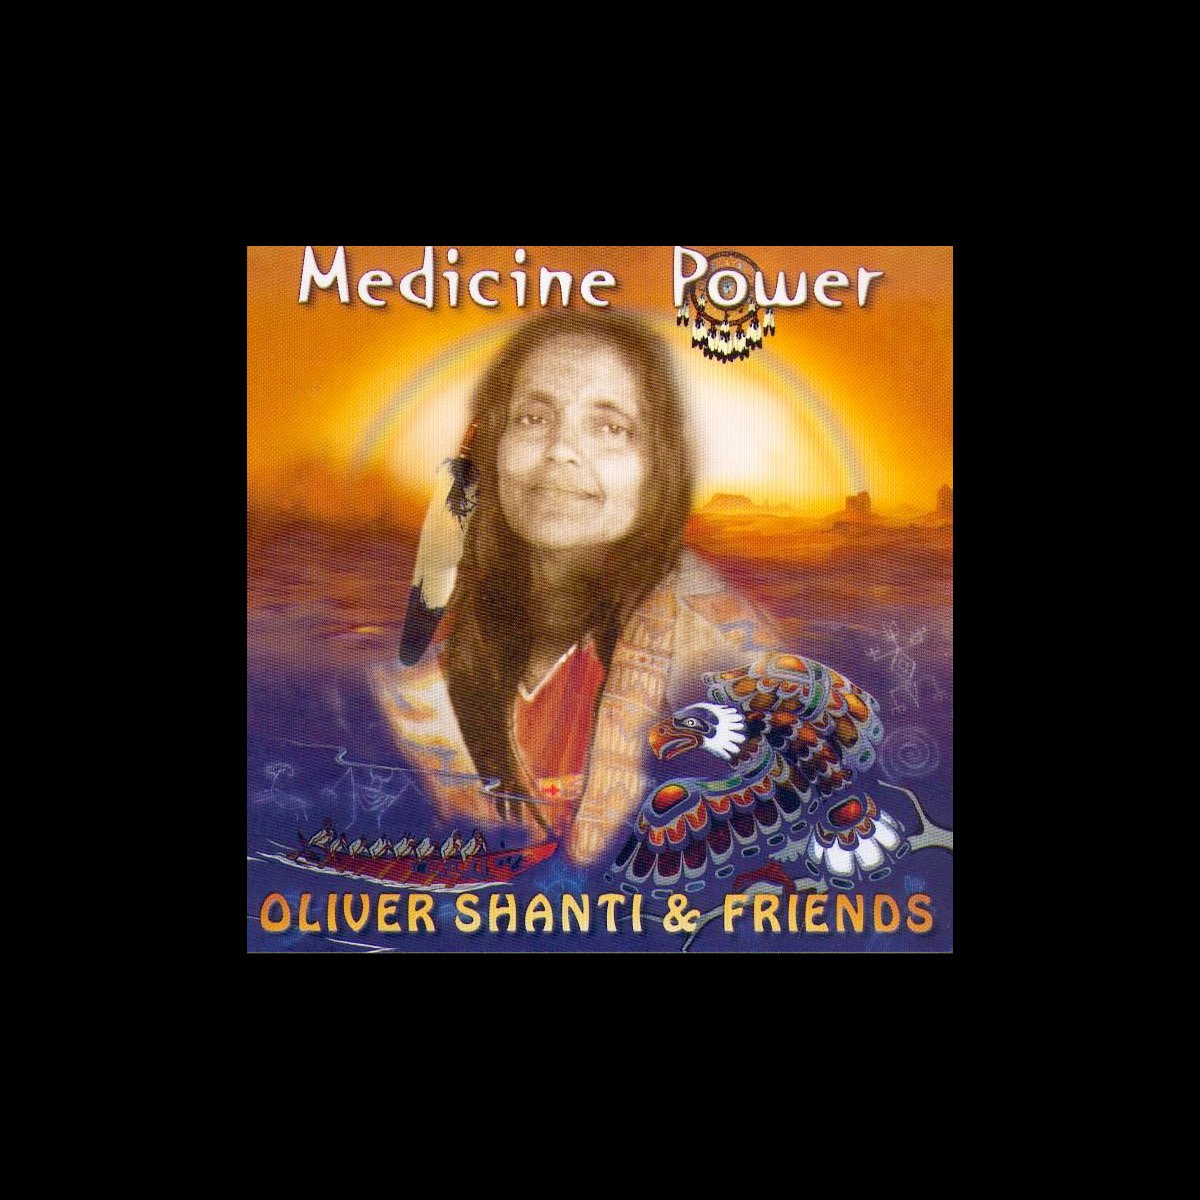 Medicine Power by Oliver Shanti & Friends on Apple Music